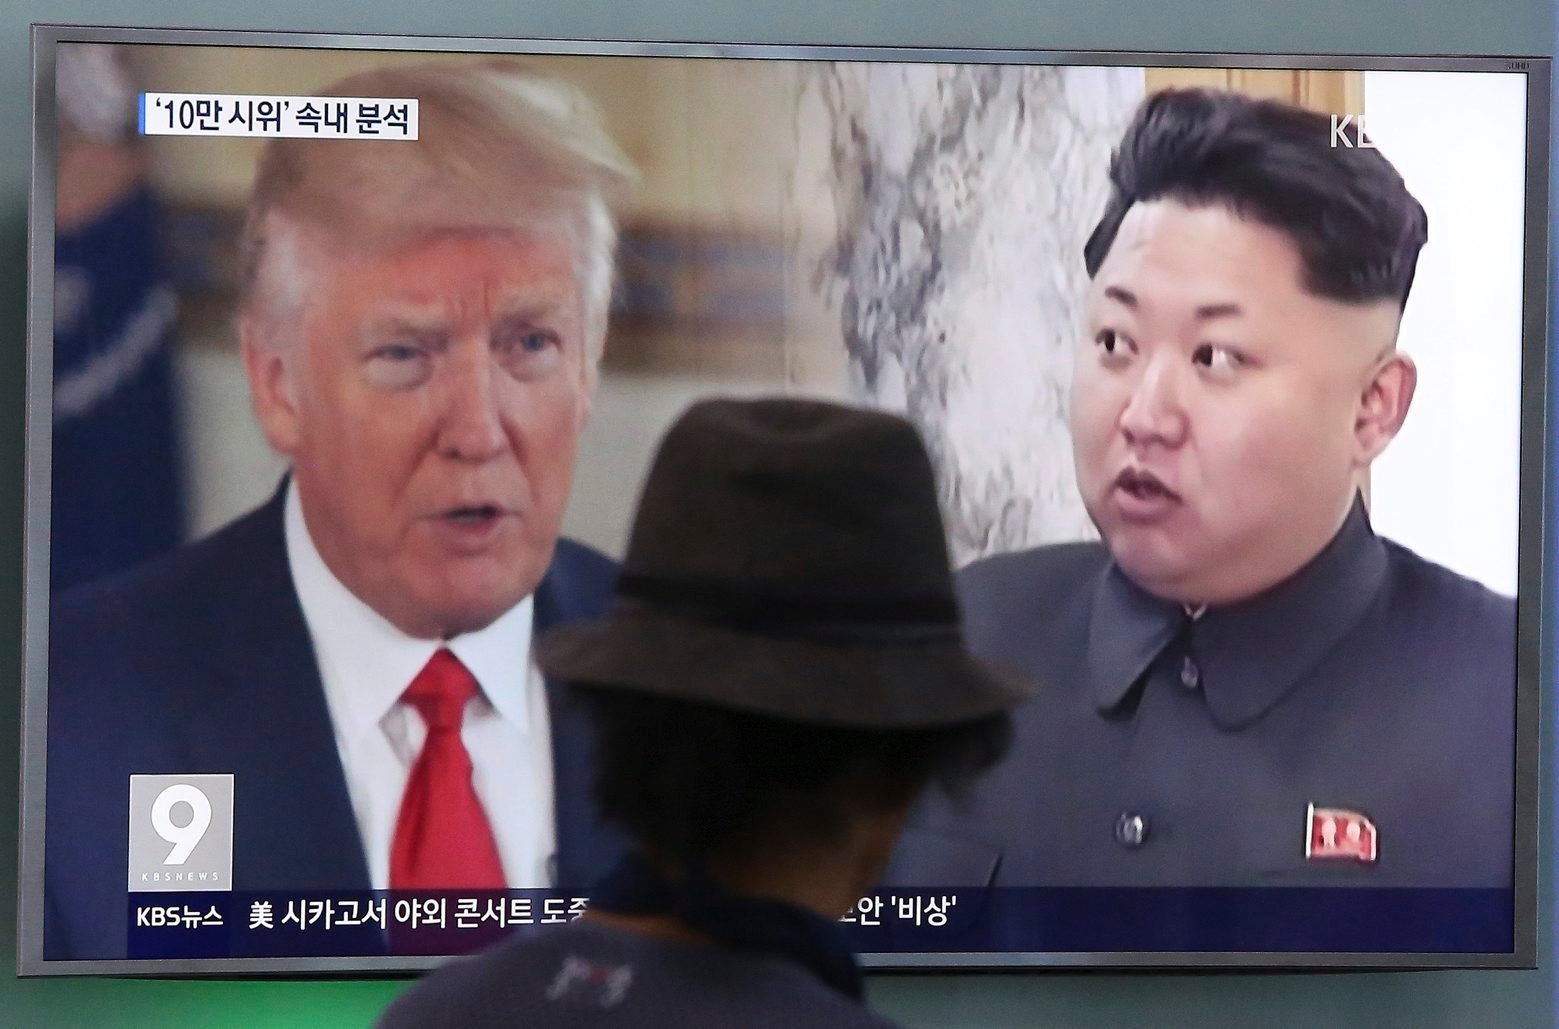 FILE- In this Aug. 10, 2017, file photo, a man watches a television screen showing U.S. President Donald Trump, left, and North Korean leader Kim Jong Un during a news program at the Seoul Railway Station in Seoul, South Korea. AmericaÄôs annual joint military exercises with South Korea always frustrate North Korea. The war games set to begin Monday, Aug. 21, 2017 may hold more potential to provoke than ever, given TrumpÄôs Äúfire and furyÄù threats and PyongyangÄôs as-yet-unpursued plan to launch missiles close to Guam. (AP Photo/Ahn Young-joon, File) Koreas Tension War Games